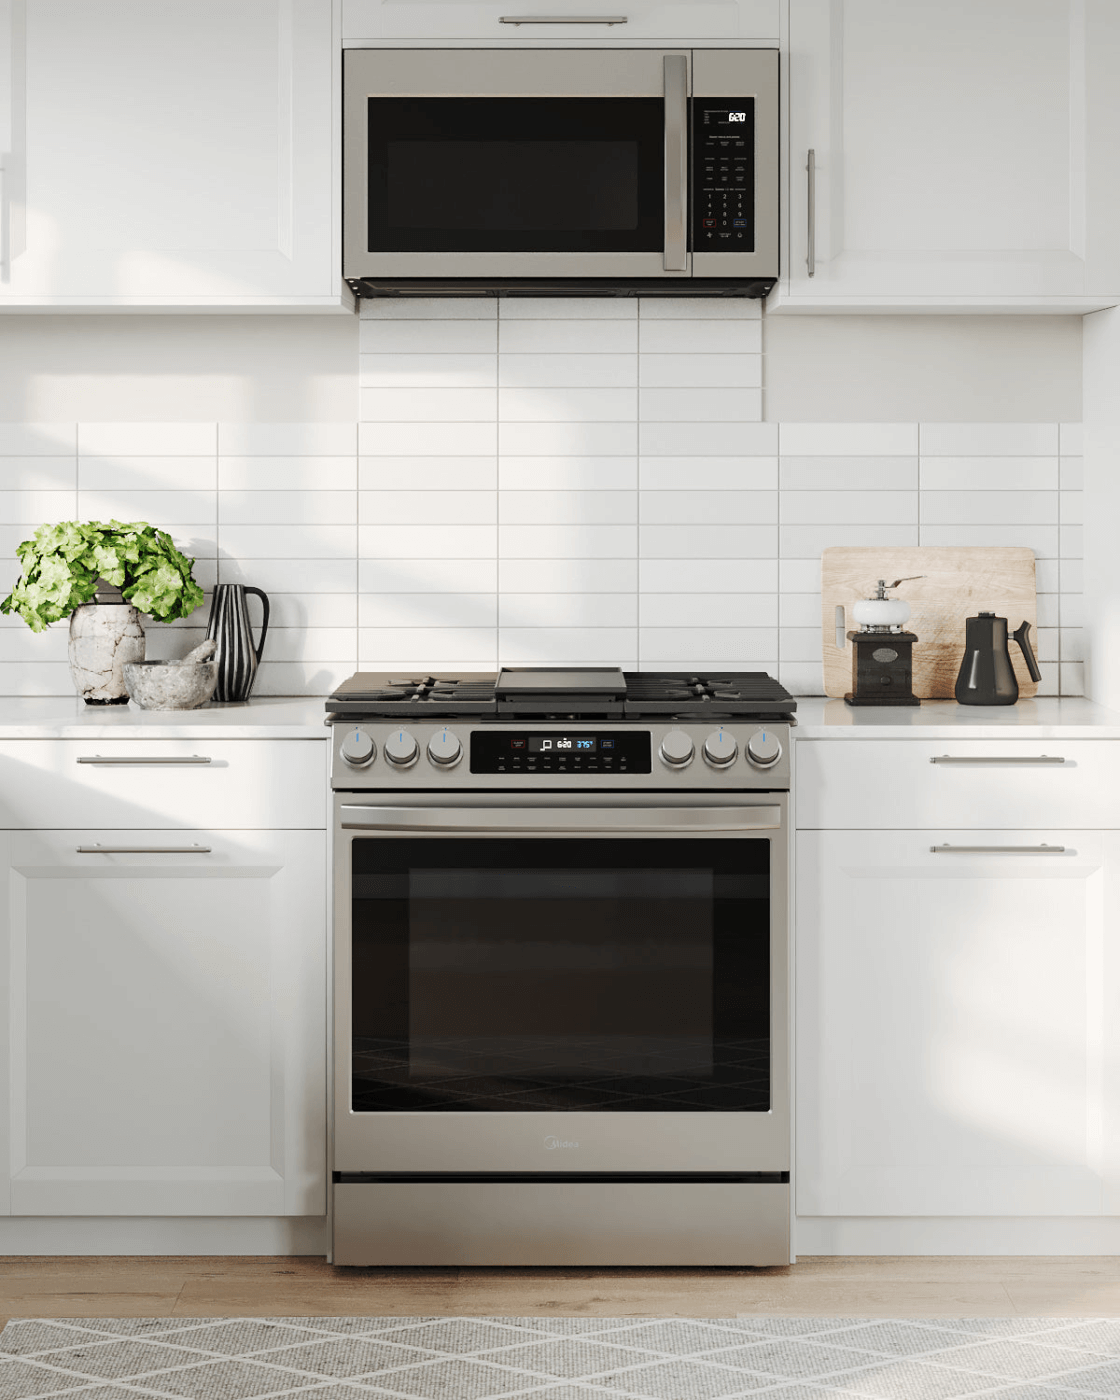 Midea Over the Range Microwave Lifestyle - white cabinetry and stainless steel range and microwave